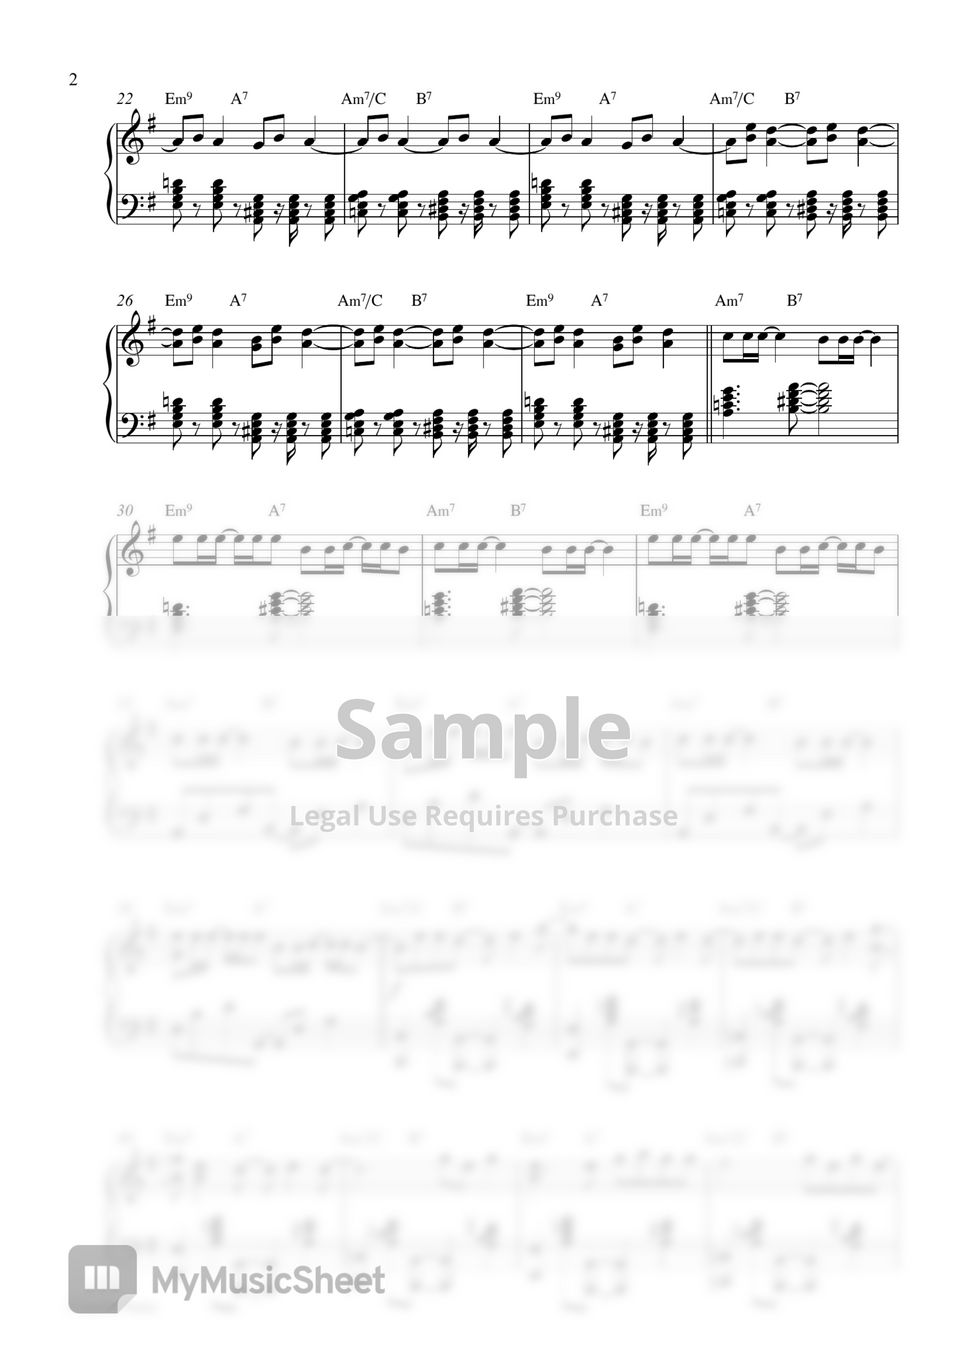 NewJeans - New Jeans (PIANO SHEET) by Pianella Piano